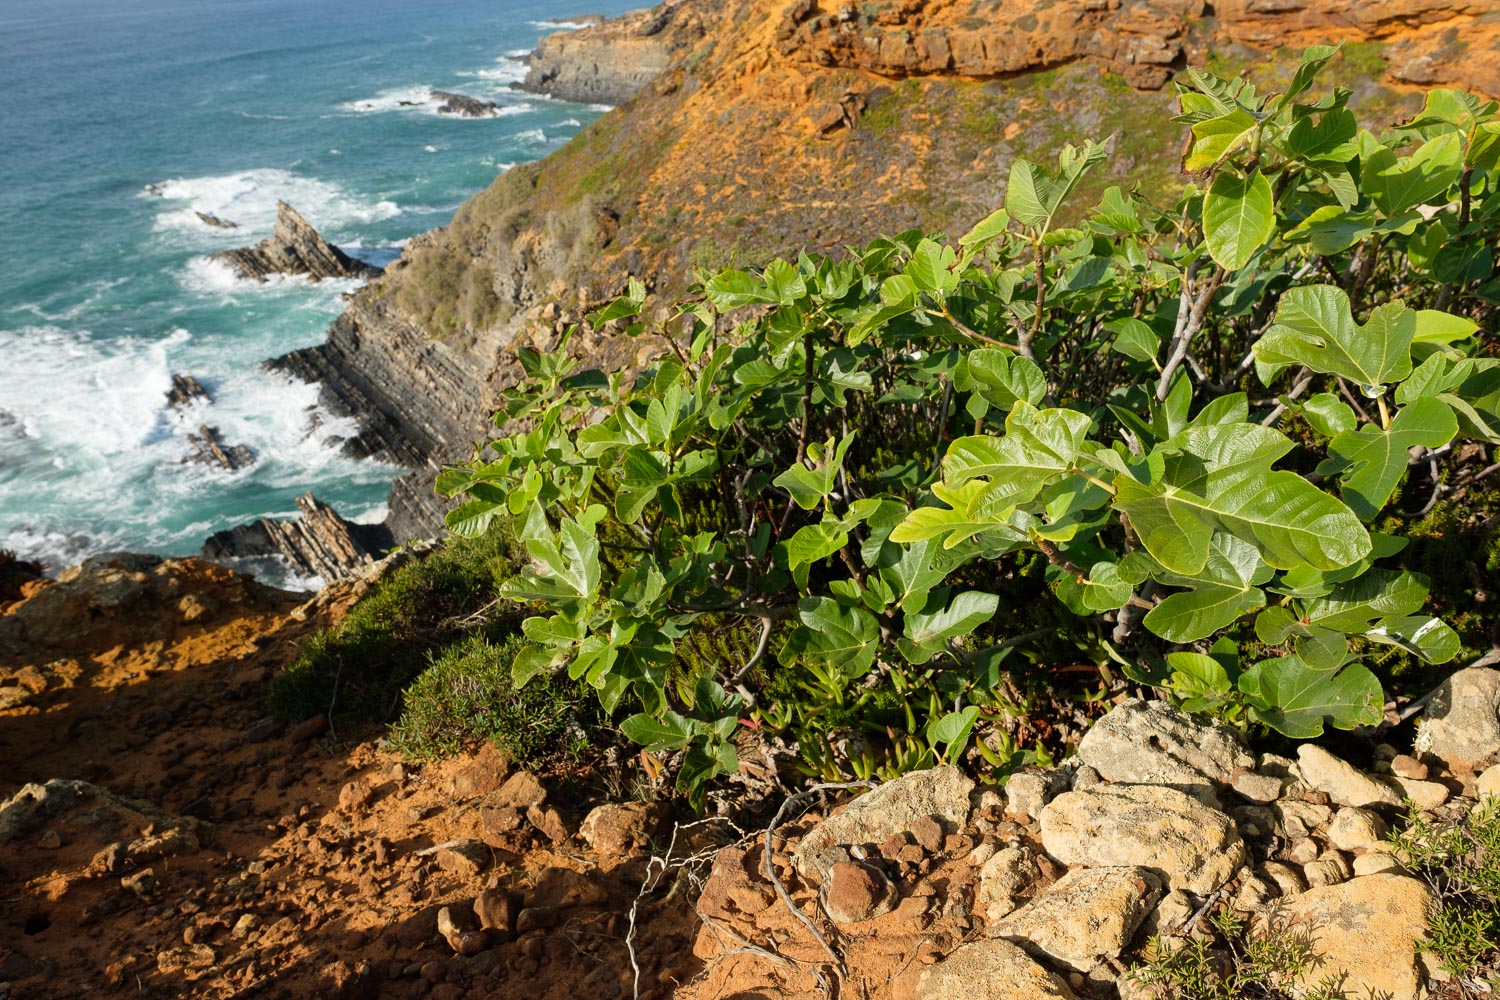 Small fig trees in the cliffs